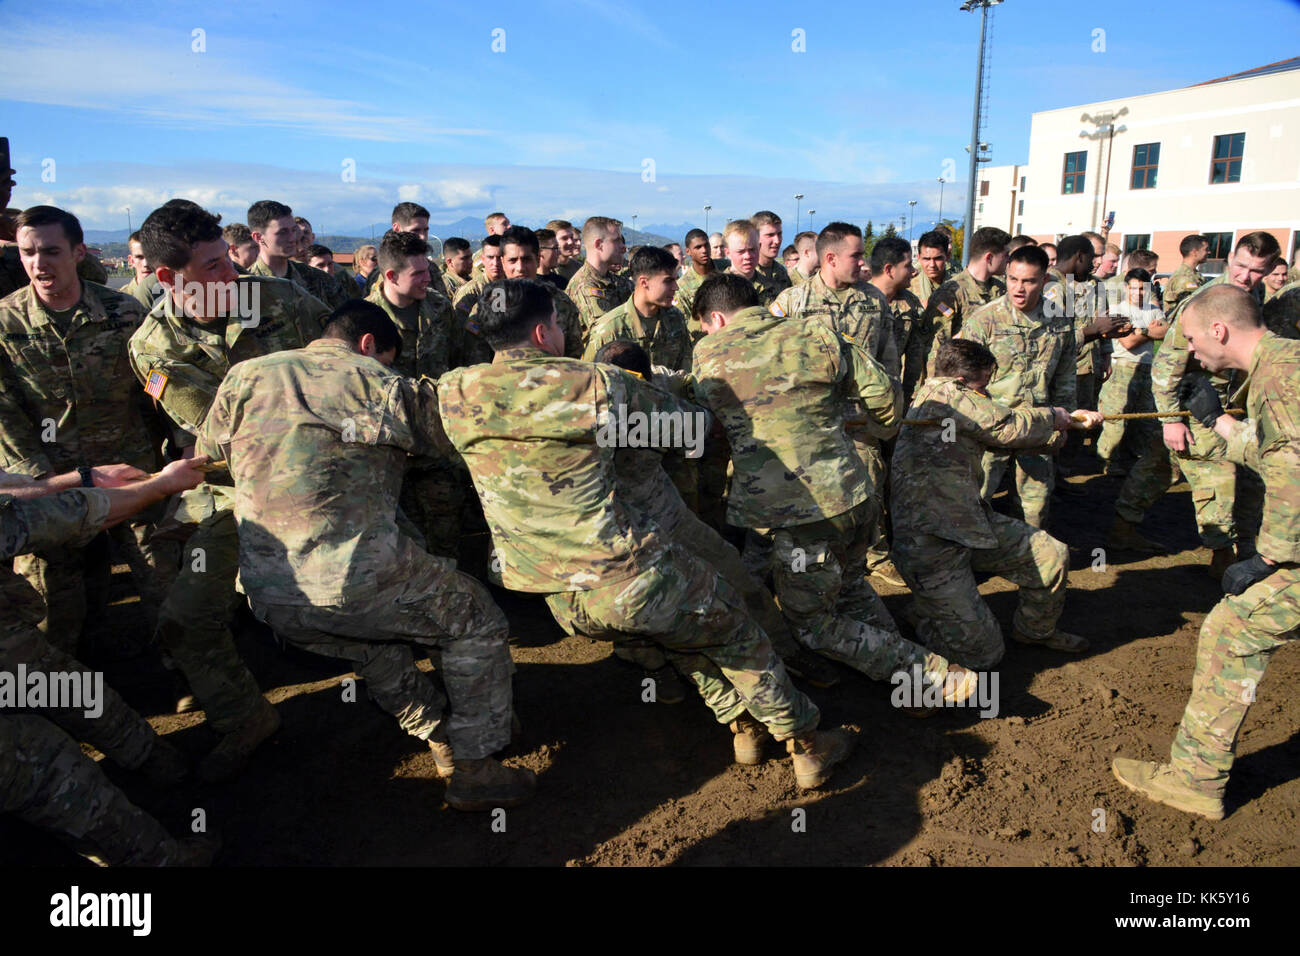 U.S. Army Paratroopers assigned to 2nd Battalion, 503rd Infantry Regiment, 173rd Airborne Brigade, compete compete in the tug-of-war during a Rockvember Event for Brostrom Challenge, at Caserma Del Din, Vicenza, Italy, Nov. 8, 2017.   The 173rd Airborne Brigade is the U.S. Army Contingency Response Force in Europe, capable of projecting ready forces anywhere in the U.S. European, Africa or Central Commands areas of responsibility within 18 hours.   (U.S. Army photo by Massimo Bovo) Stock Photo